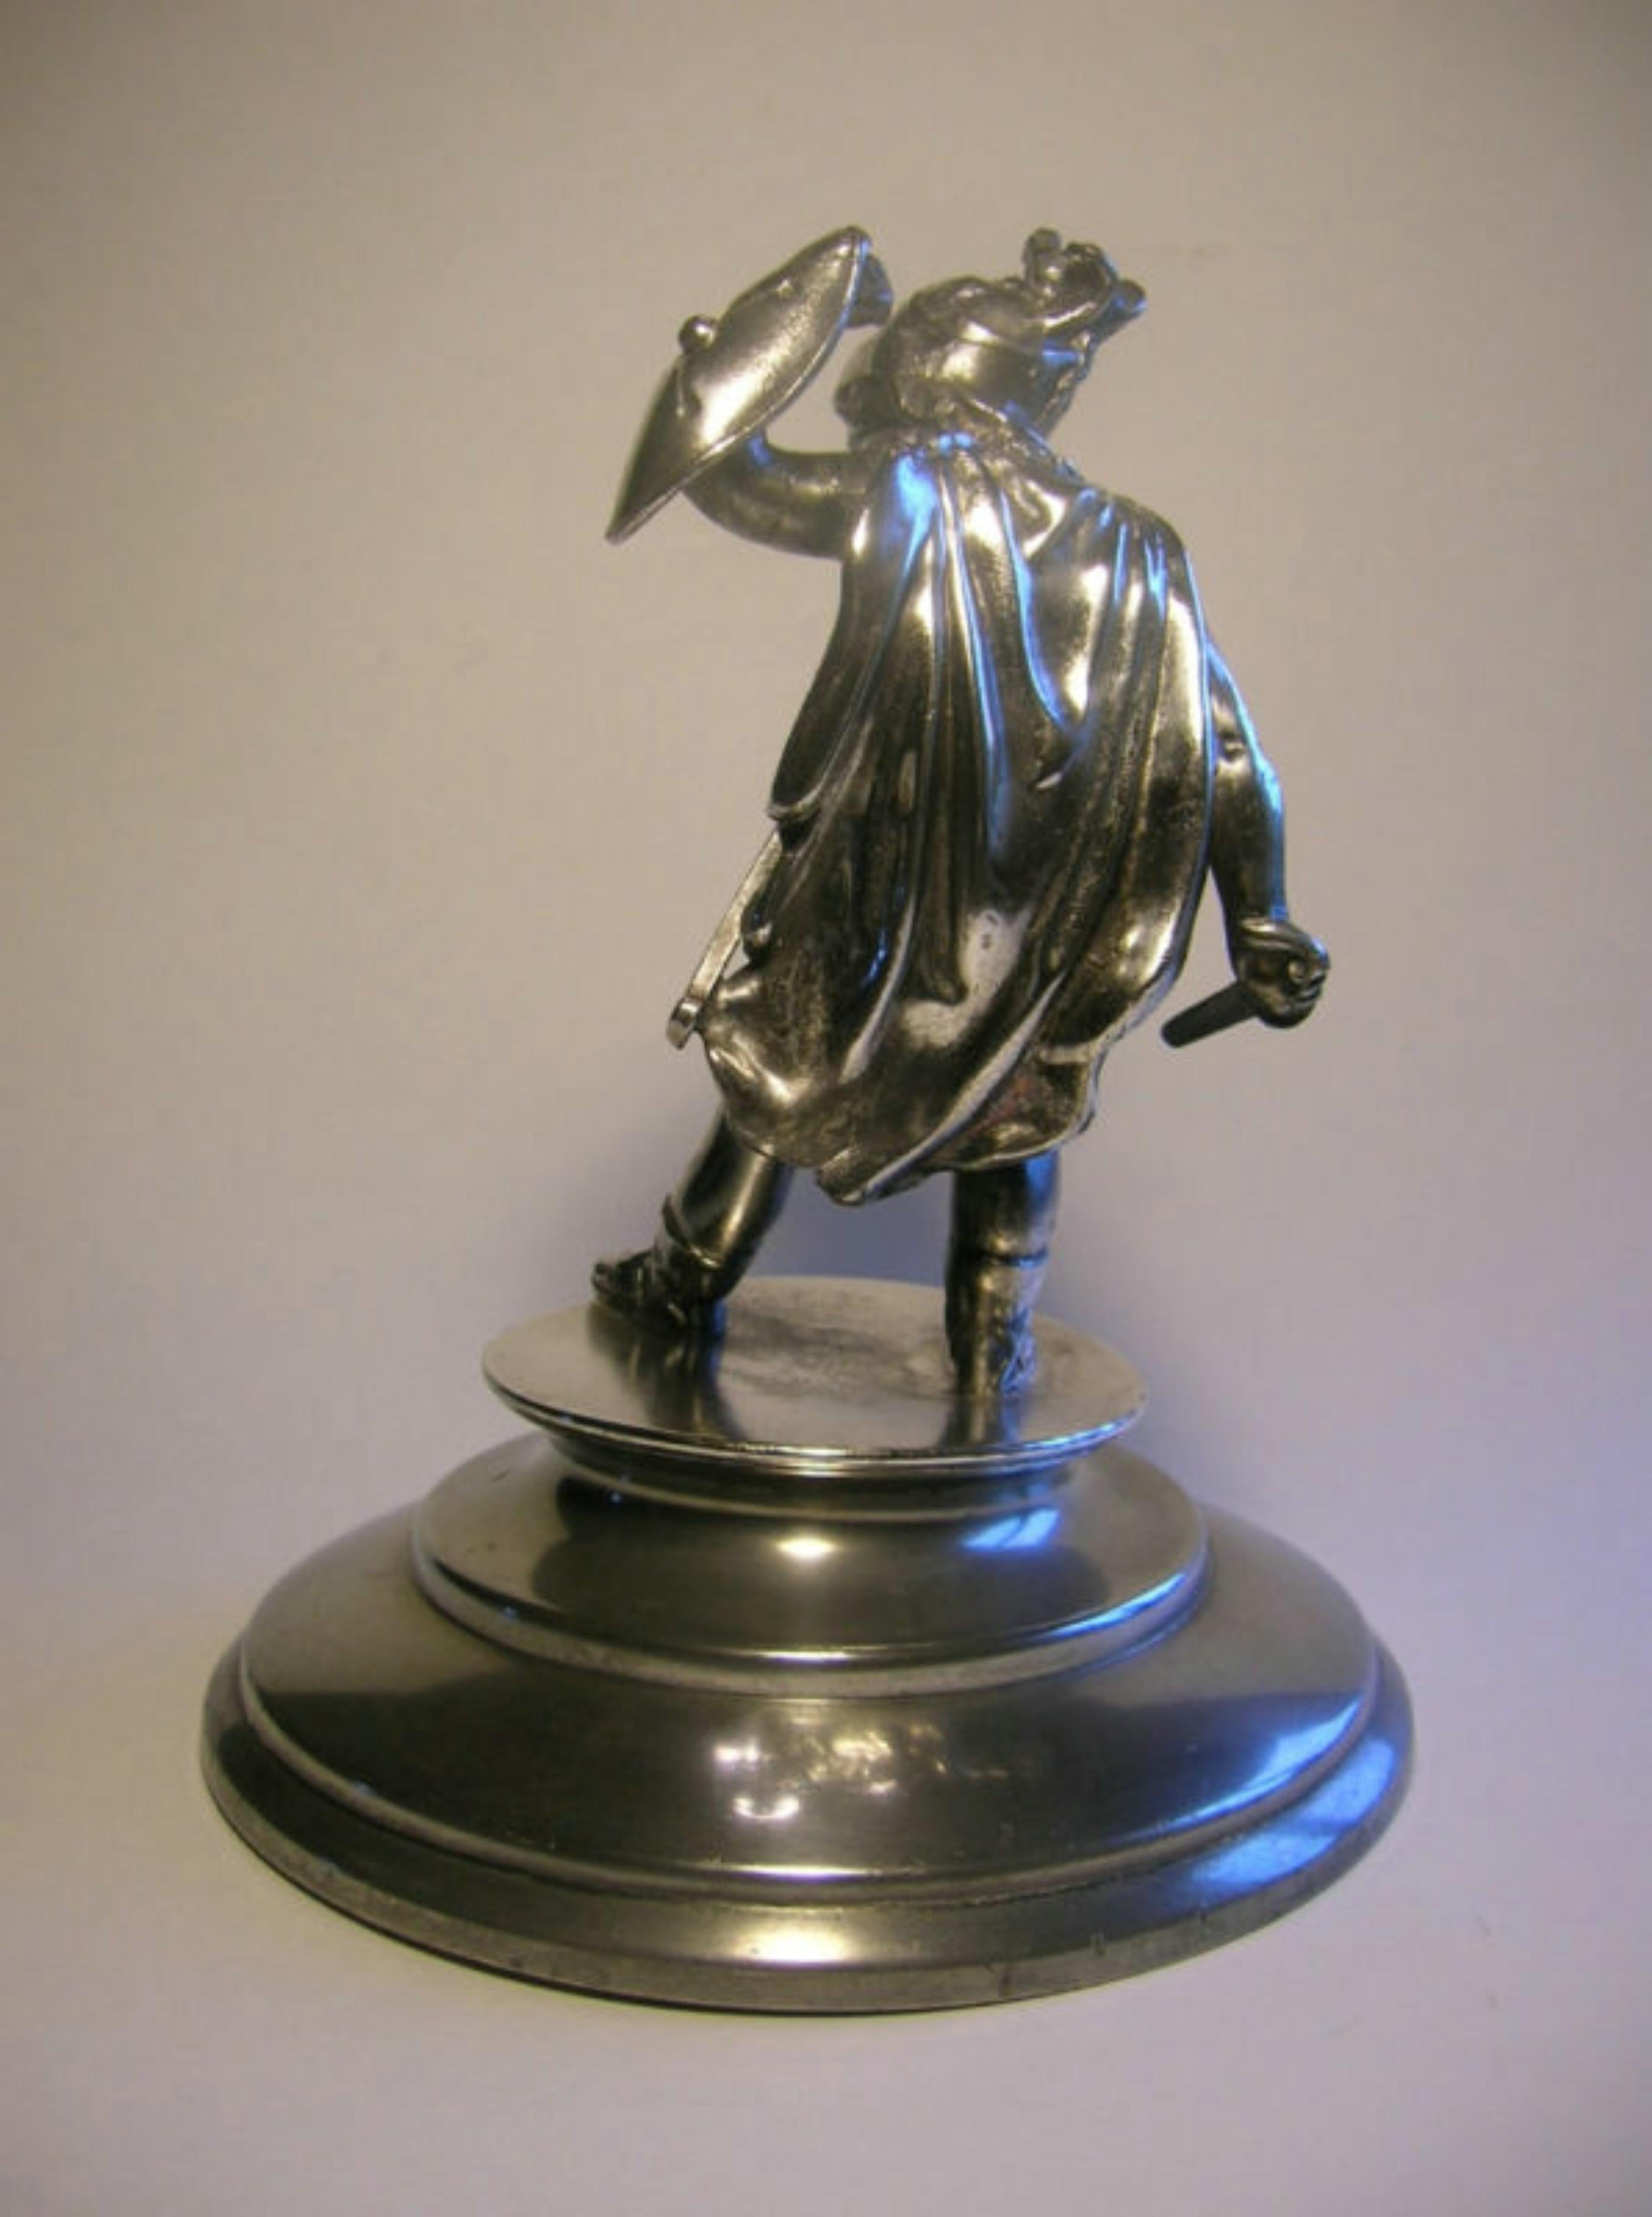 Cast MIDDLETOWN PLATE CO. - Antique Neoclassical Warrior Statue - U.S. - Late 19th C. For Sale